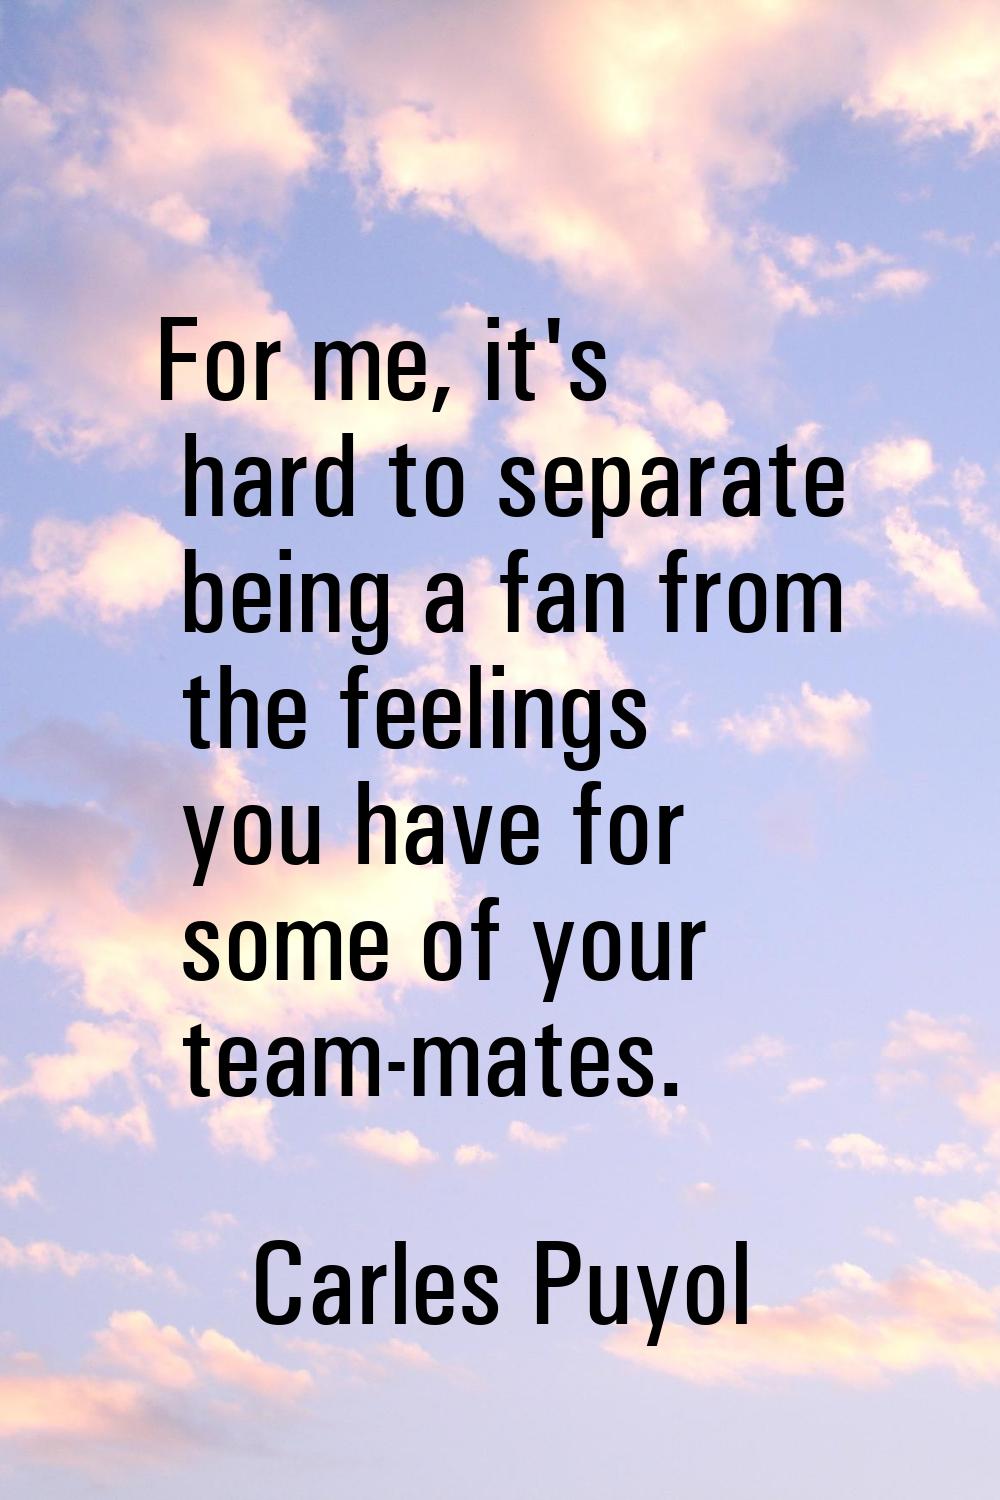 For me, it's hard to separate being a fan from the feelings you have for some of your team-mates.